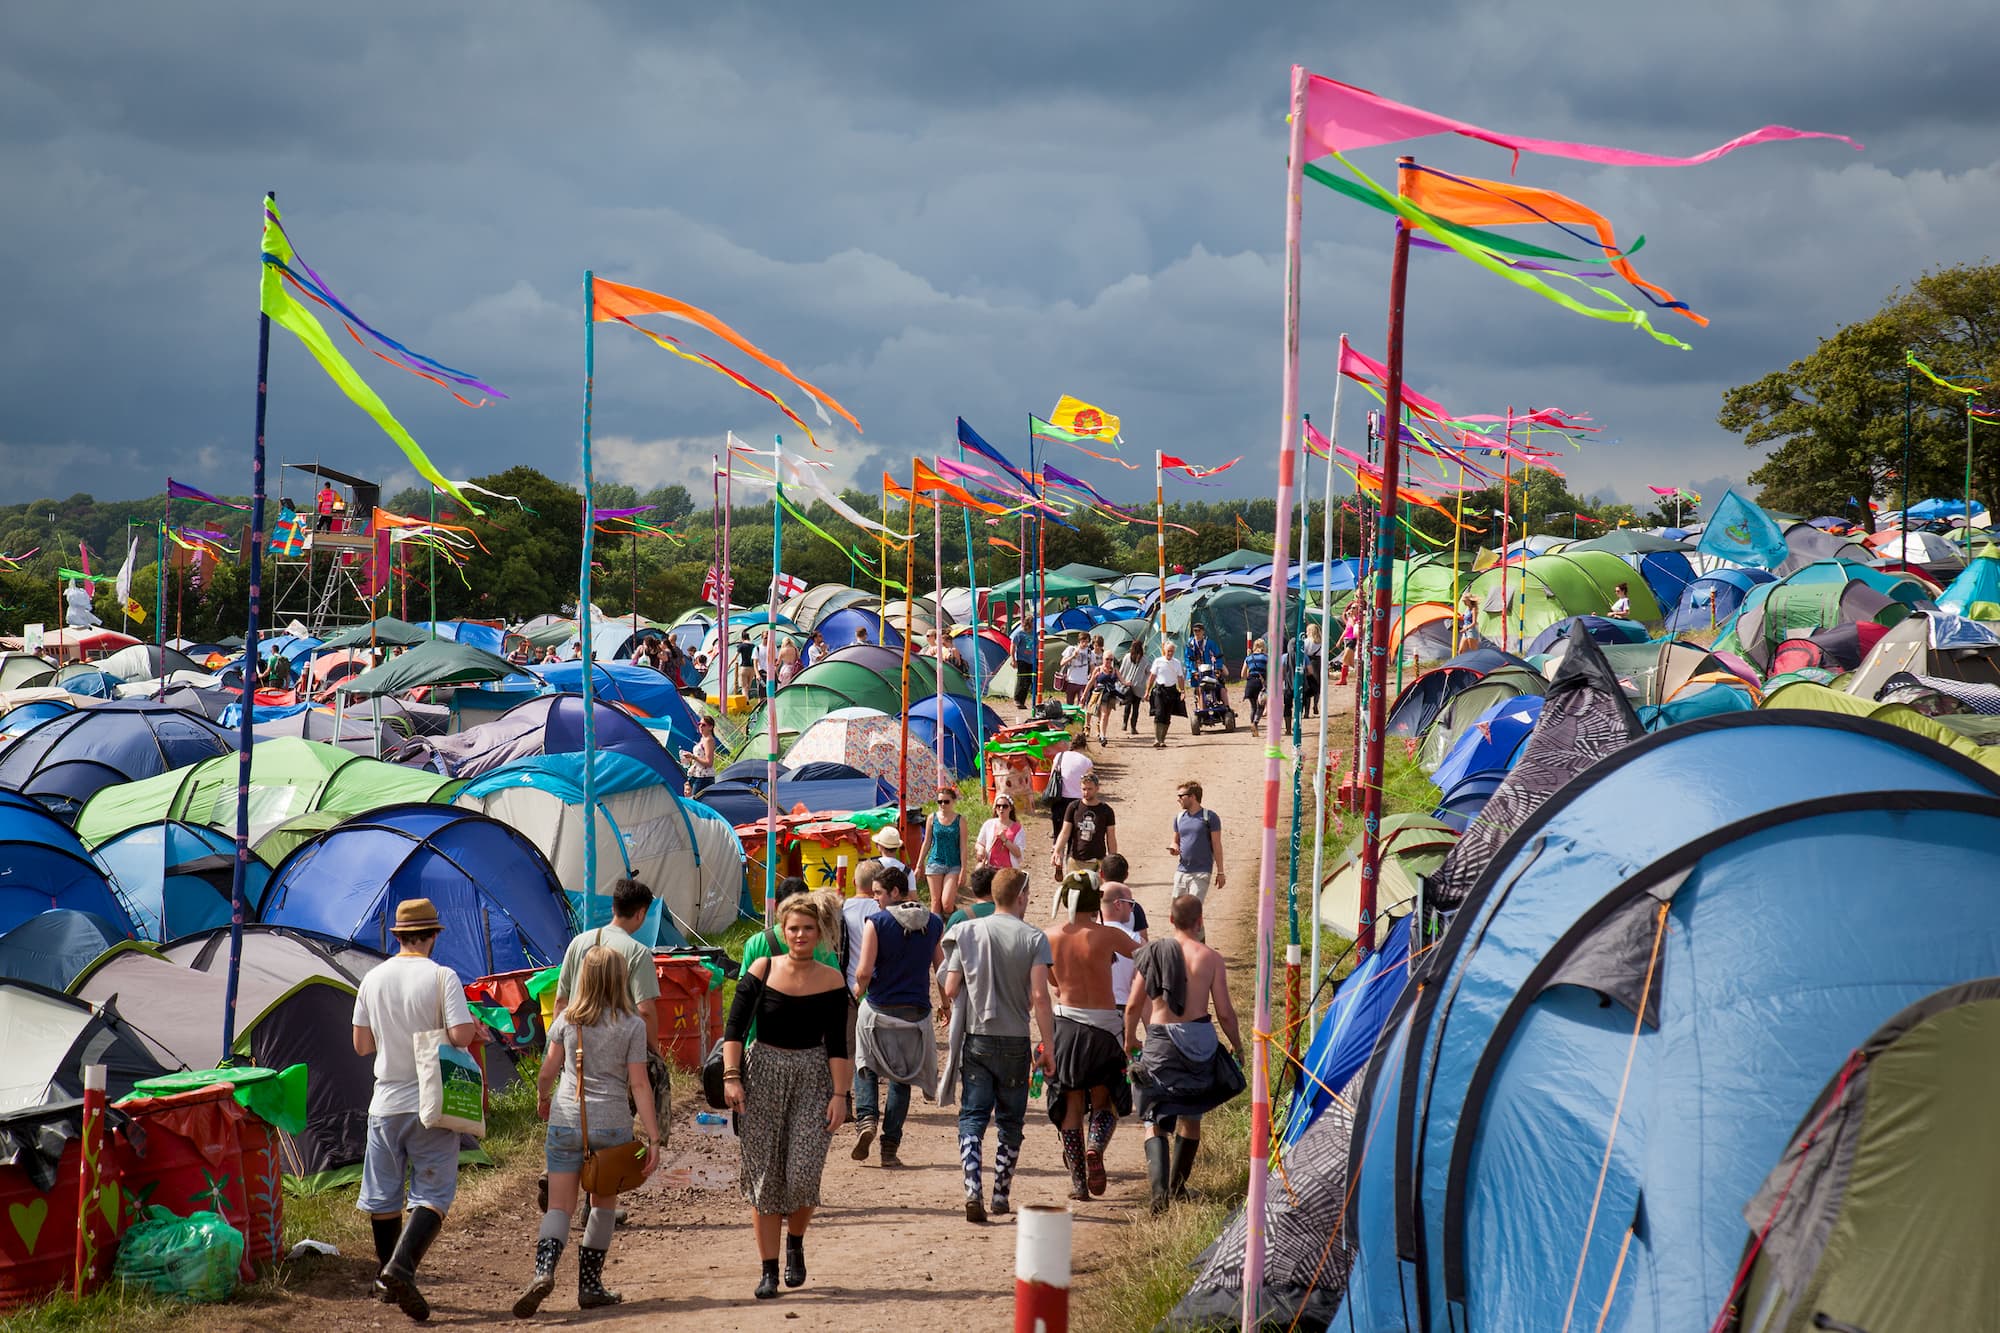 Groups of blue tents at a music festival with people walking along a path to the right